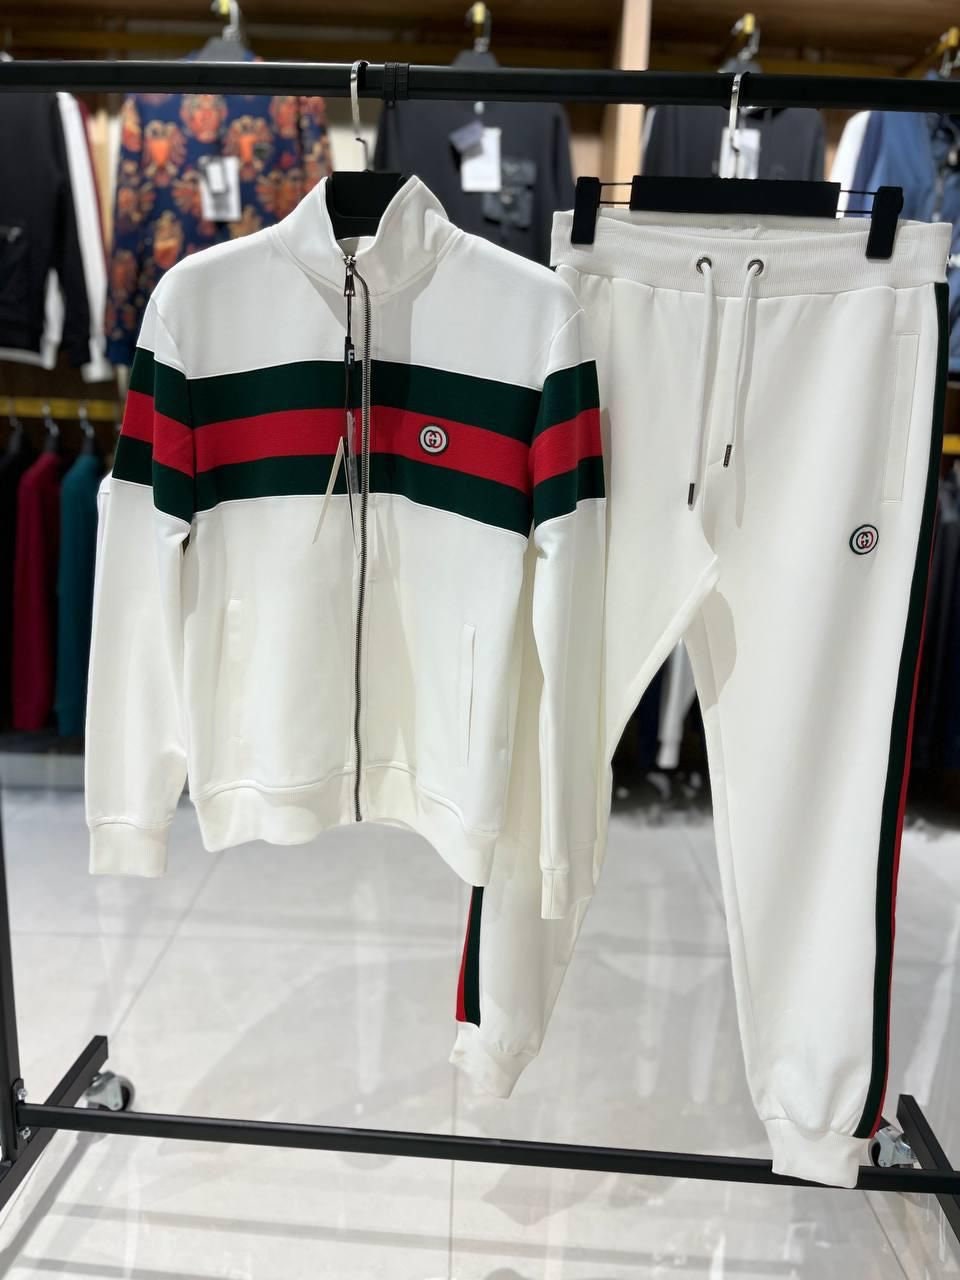 Gucci clothing for Men